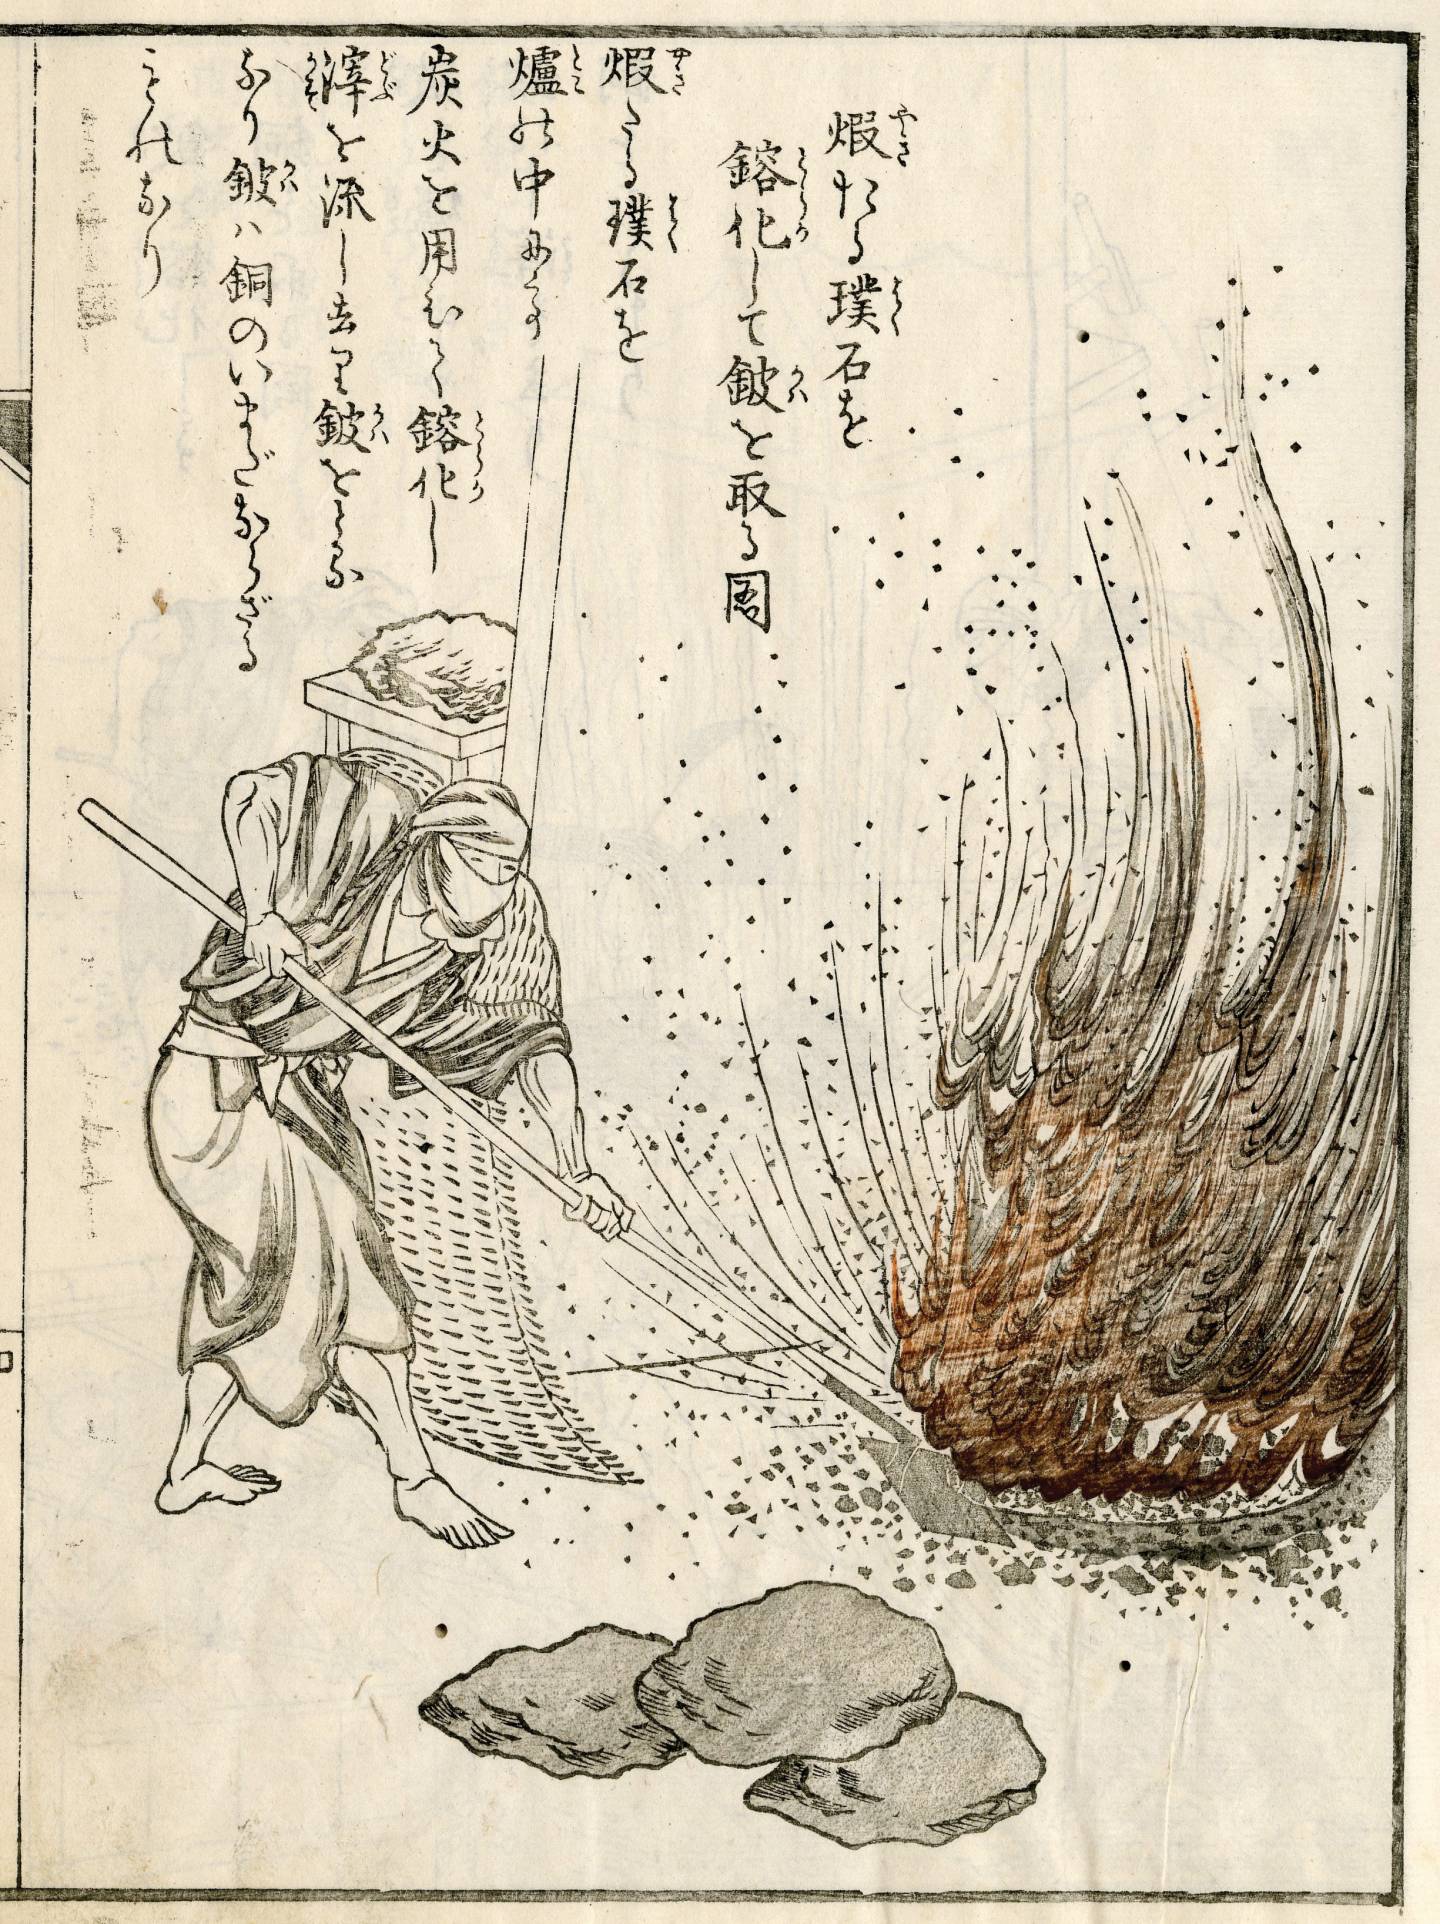 Illustration of medieval metallurgical practices in Japan